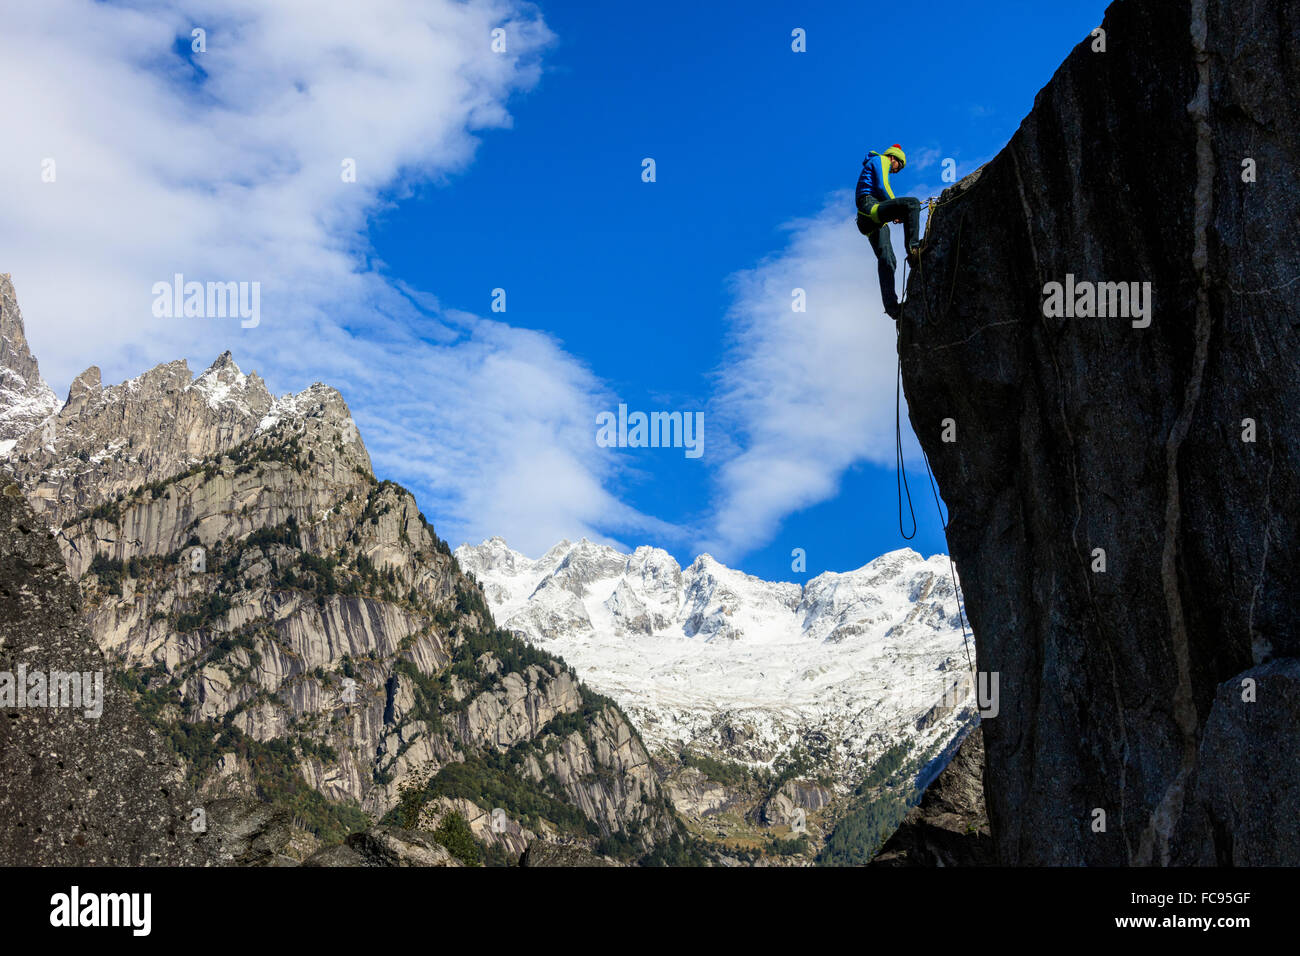 Climber on steep rock face in the background blue sky and snowy peaks of the Alps, Masino Valley, Valtellina, Lombardy, Italy Stock Photo